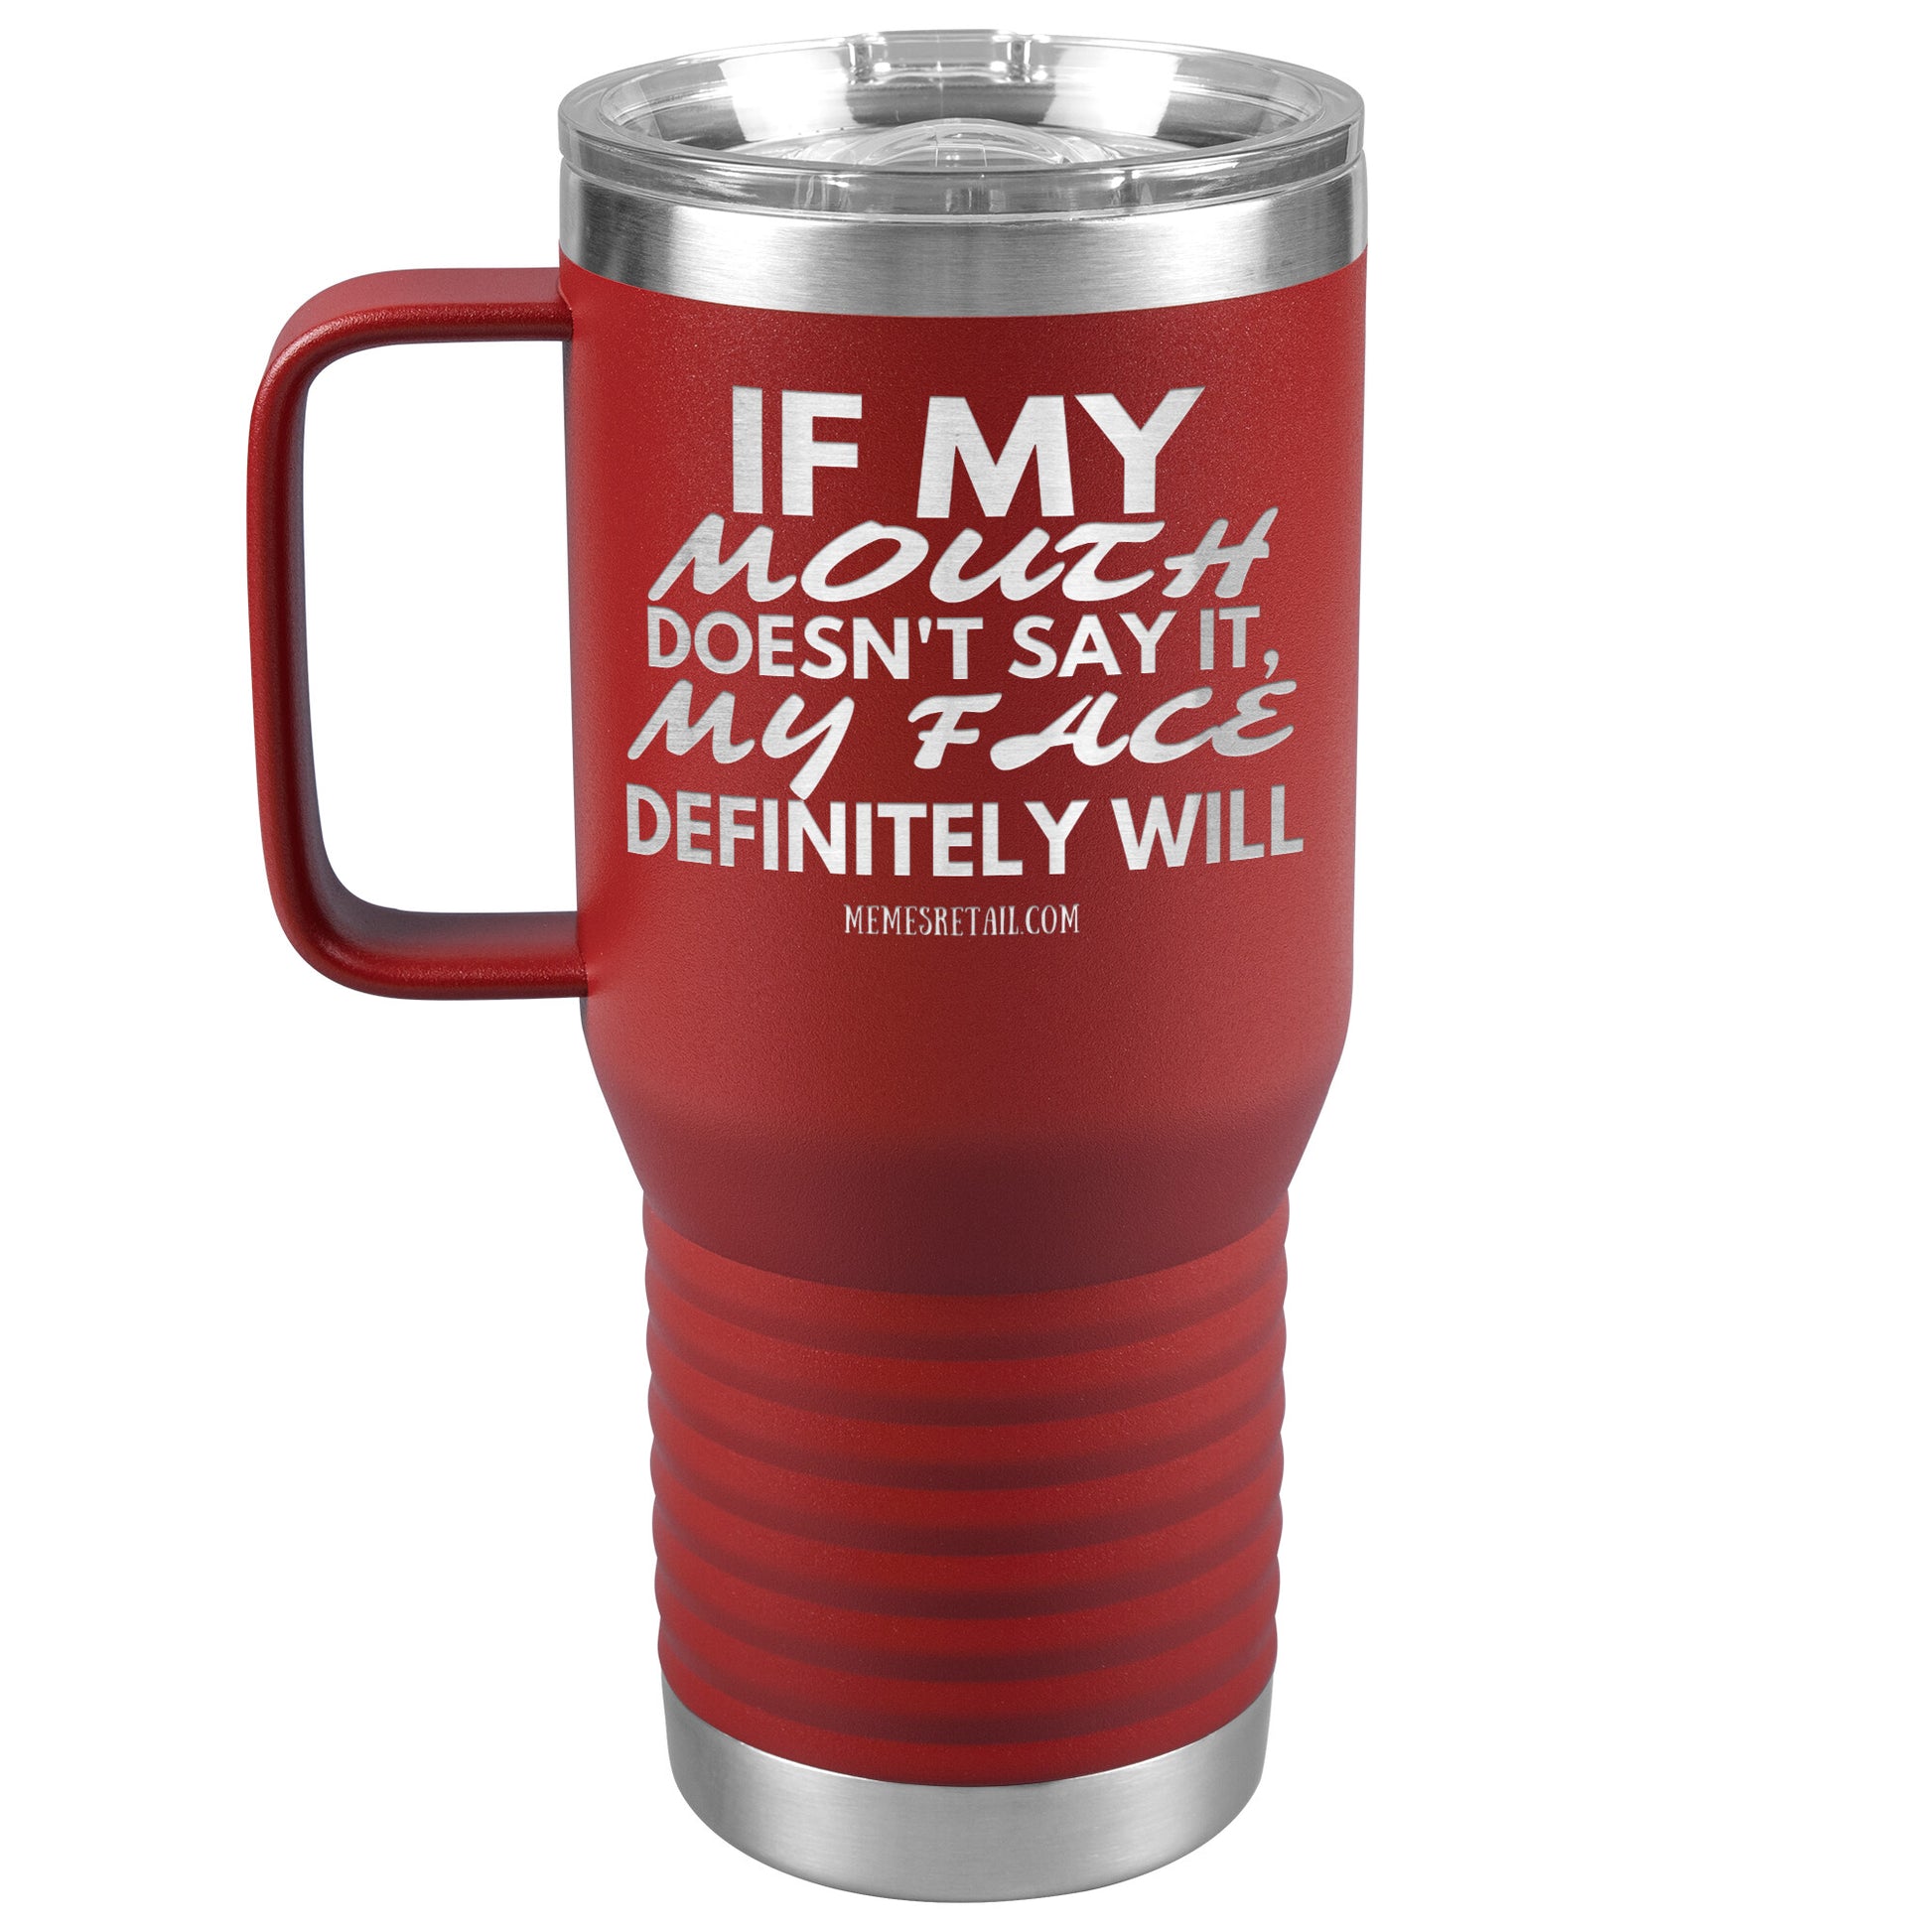 If my mouth doesn't say it, my face definitely will Tumblers, 20oz Travel Tumbler / Red - MemesRetail.com